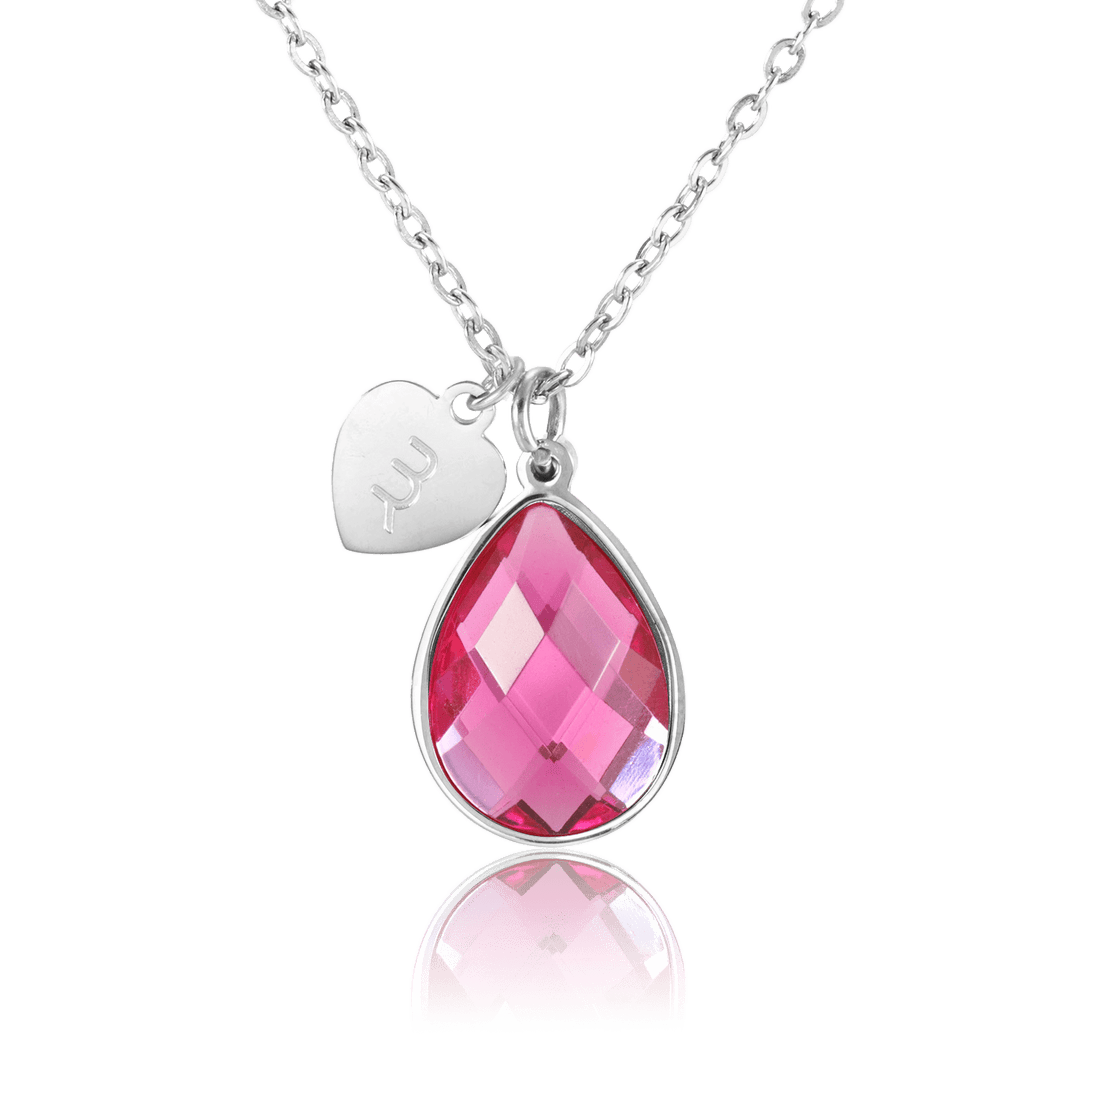 bianco rosso Necklaces Gold September Birthstone - Rose Quartz cyprus greece jewelry gift free shipping europe worldwide